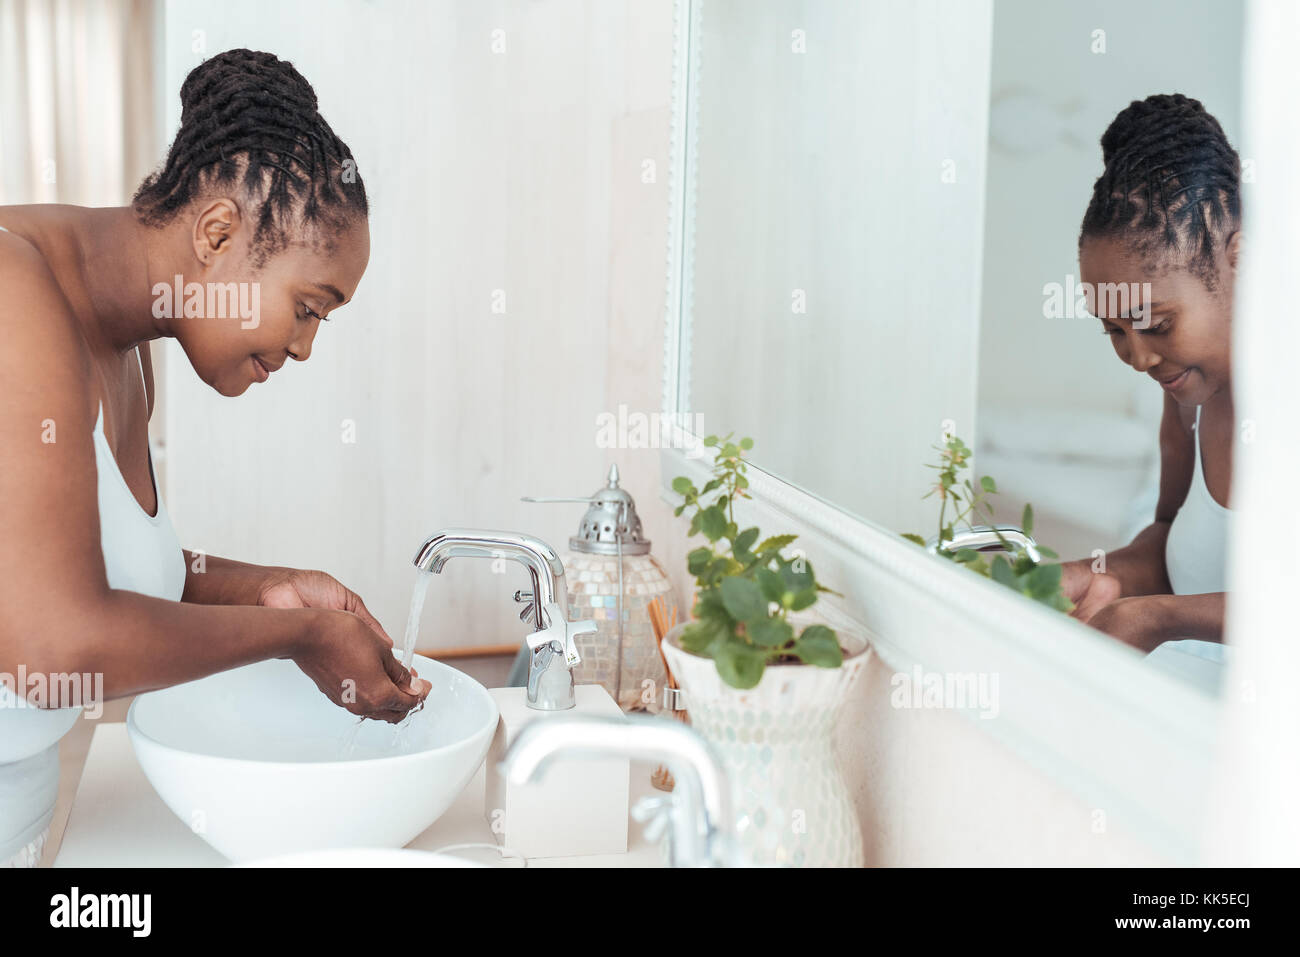 Young African woman washing her face in the bathroom sink Stock Photo